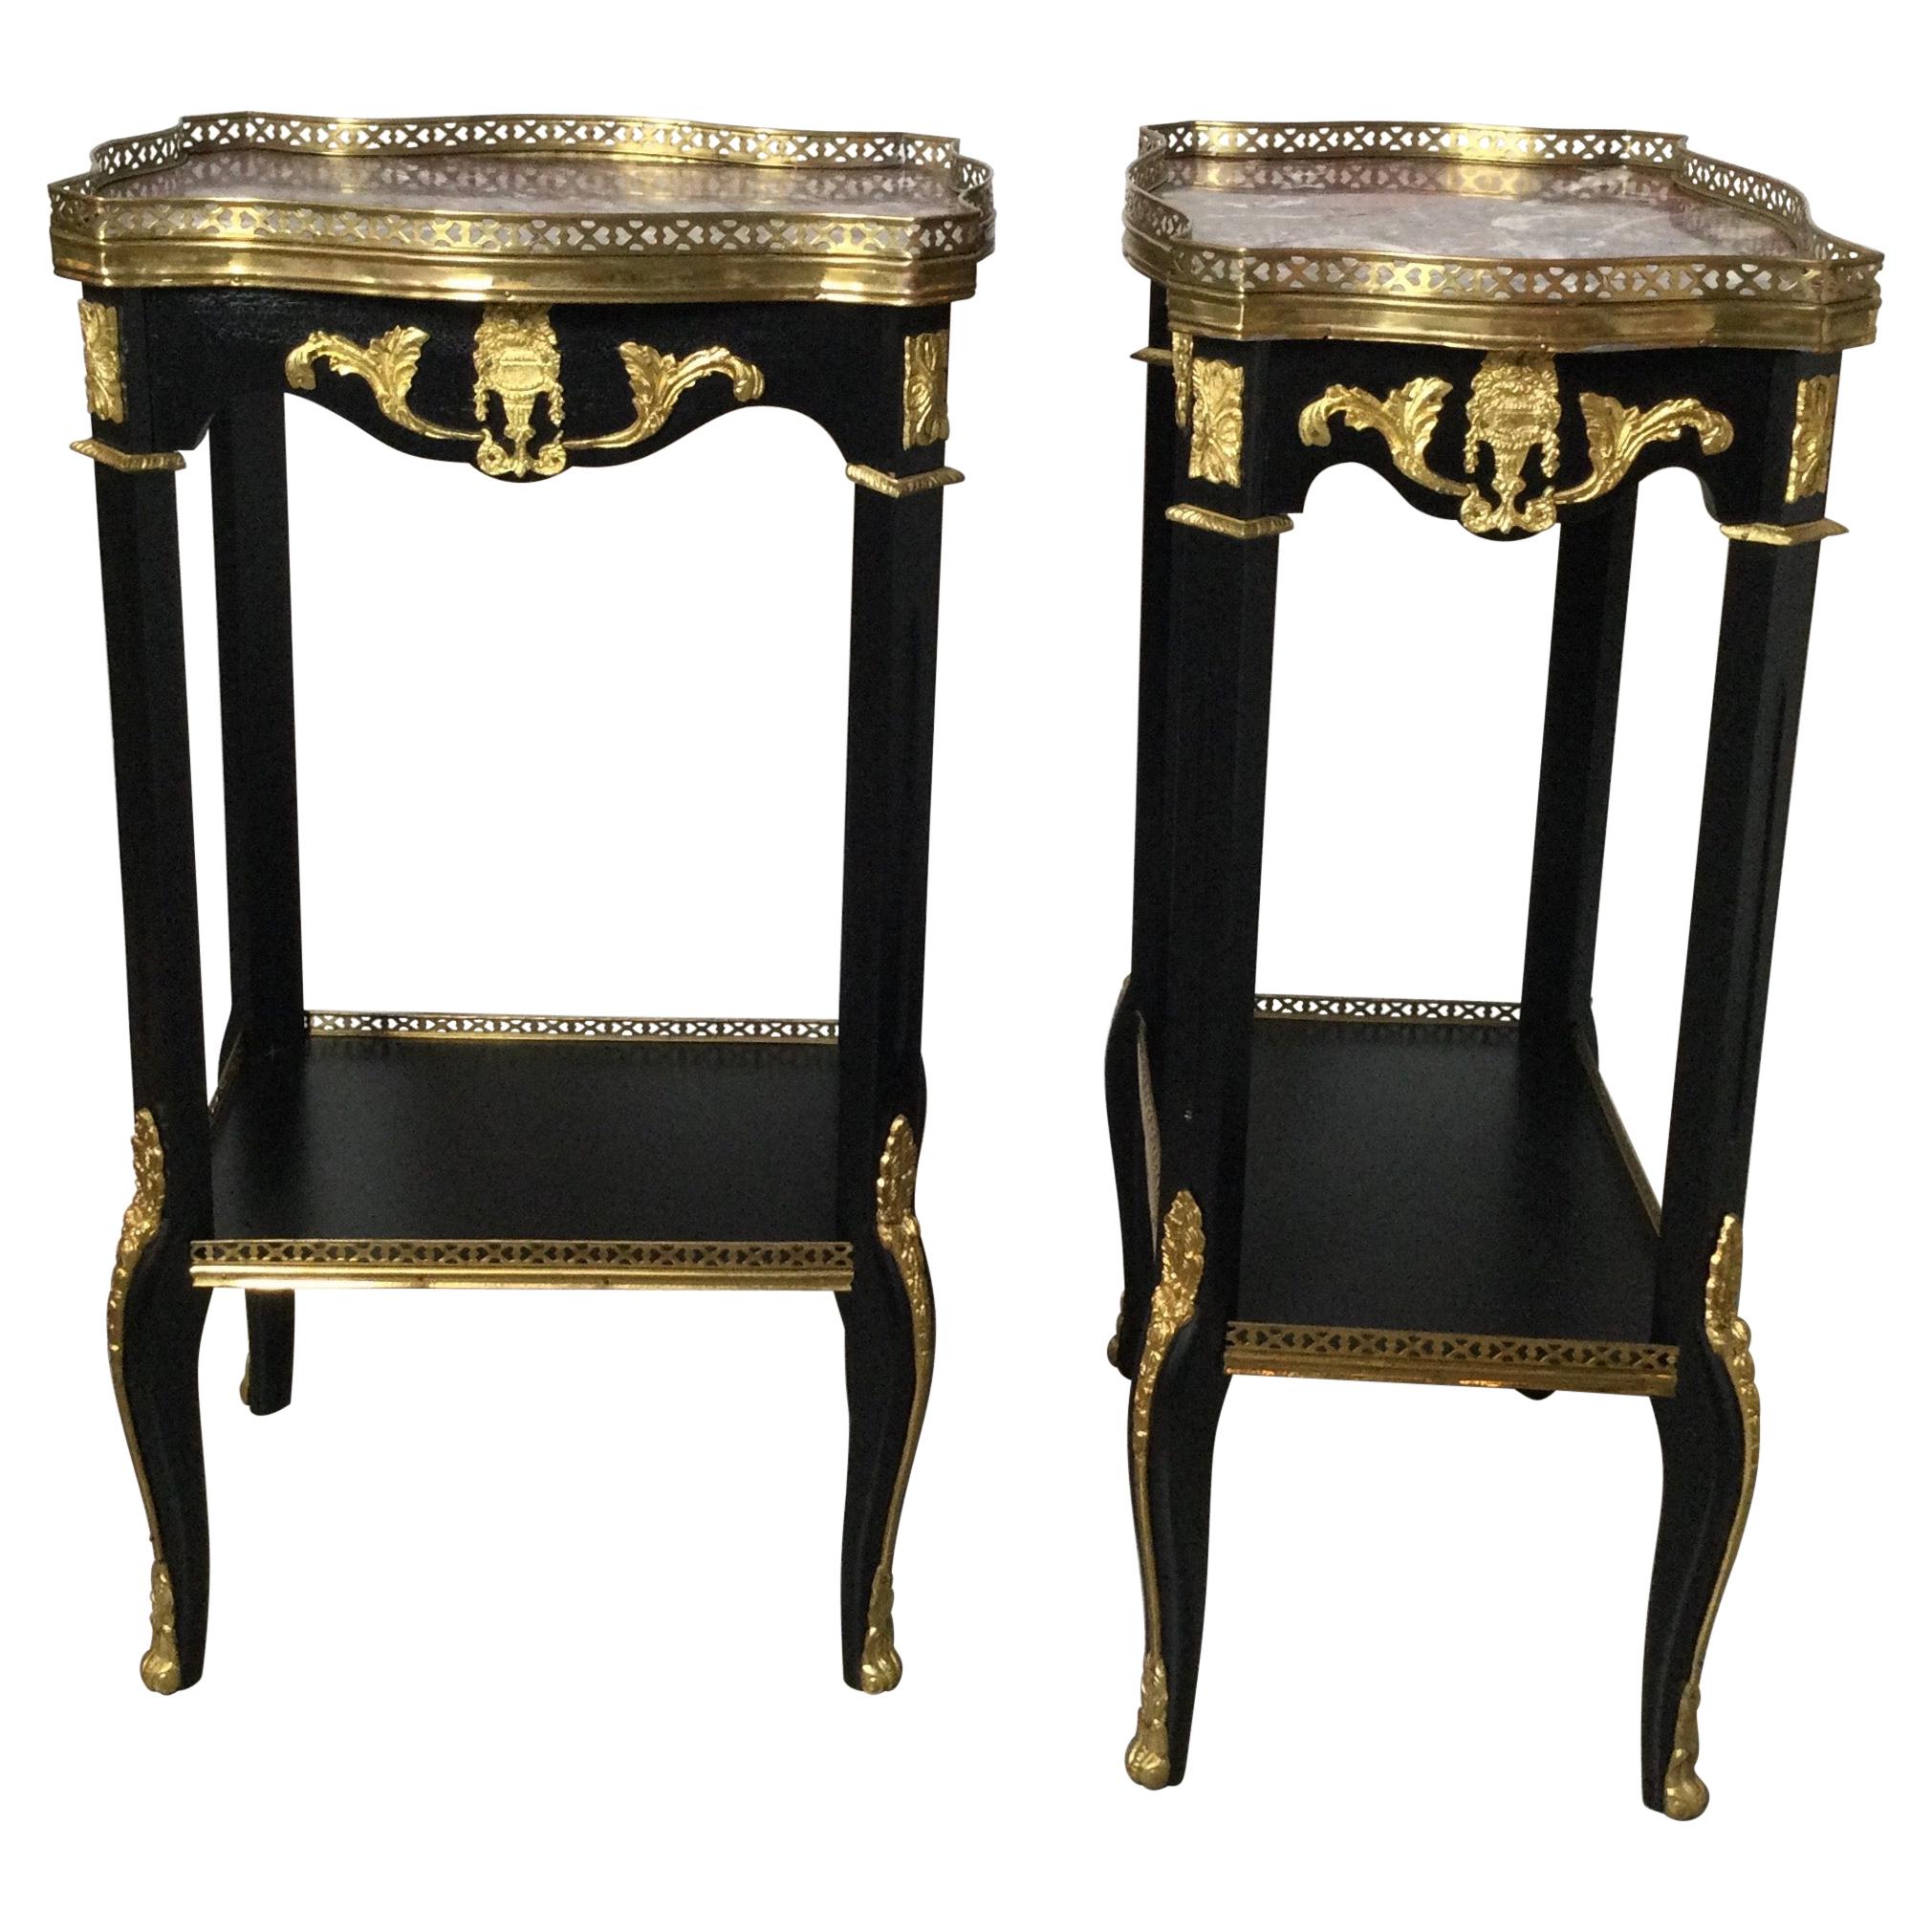 Pair of Ebonized Wood and Marble Diminutive Side Tables